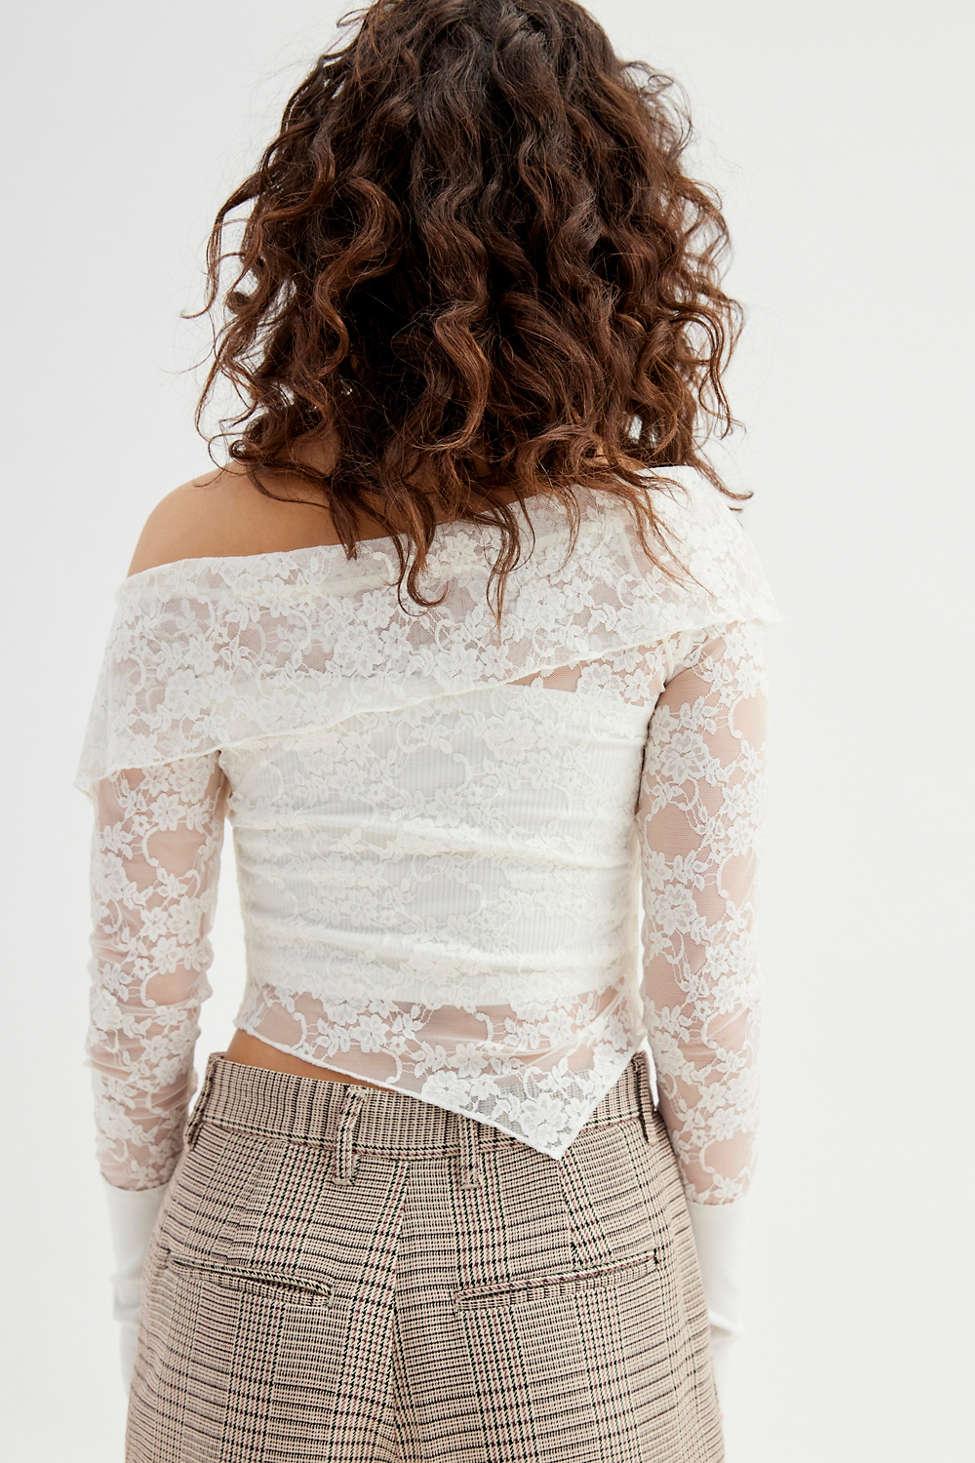 Urban Outfitters Uo Amarillis Sheer Lace Off-the-shoulder Top in